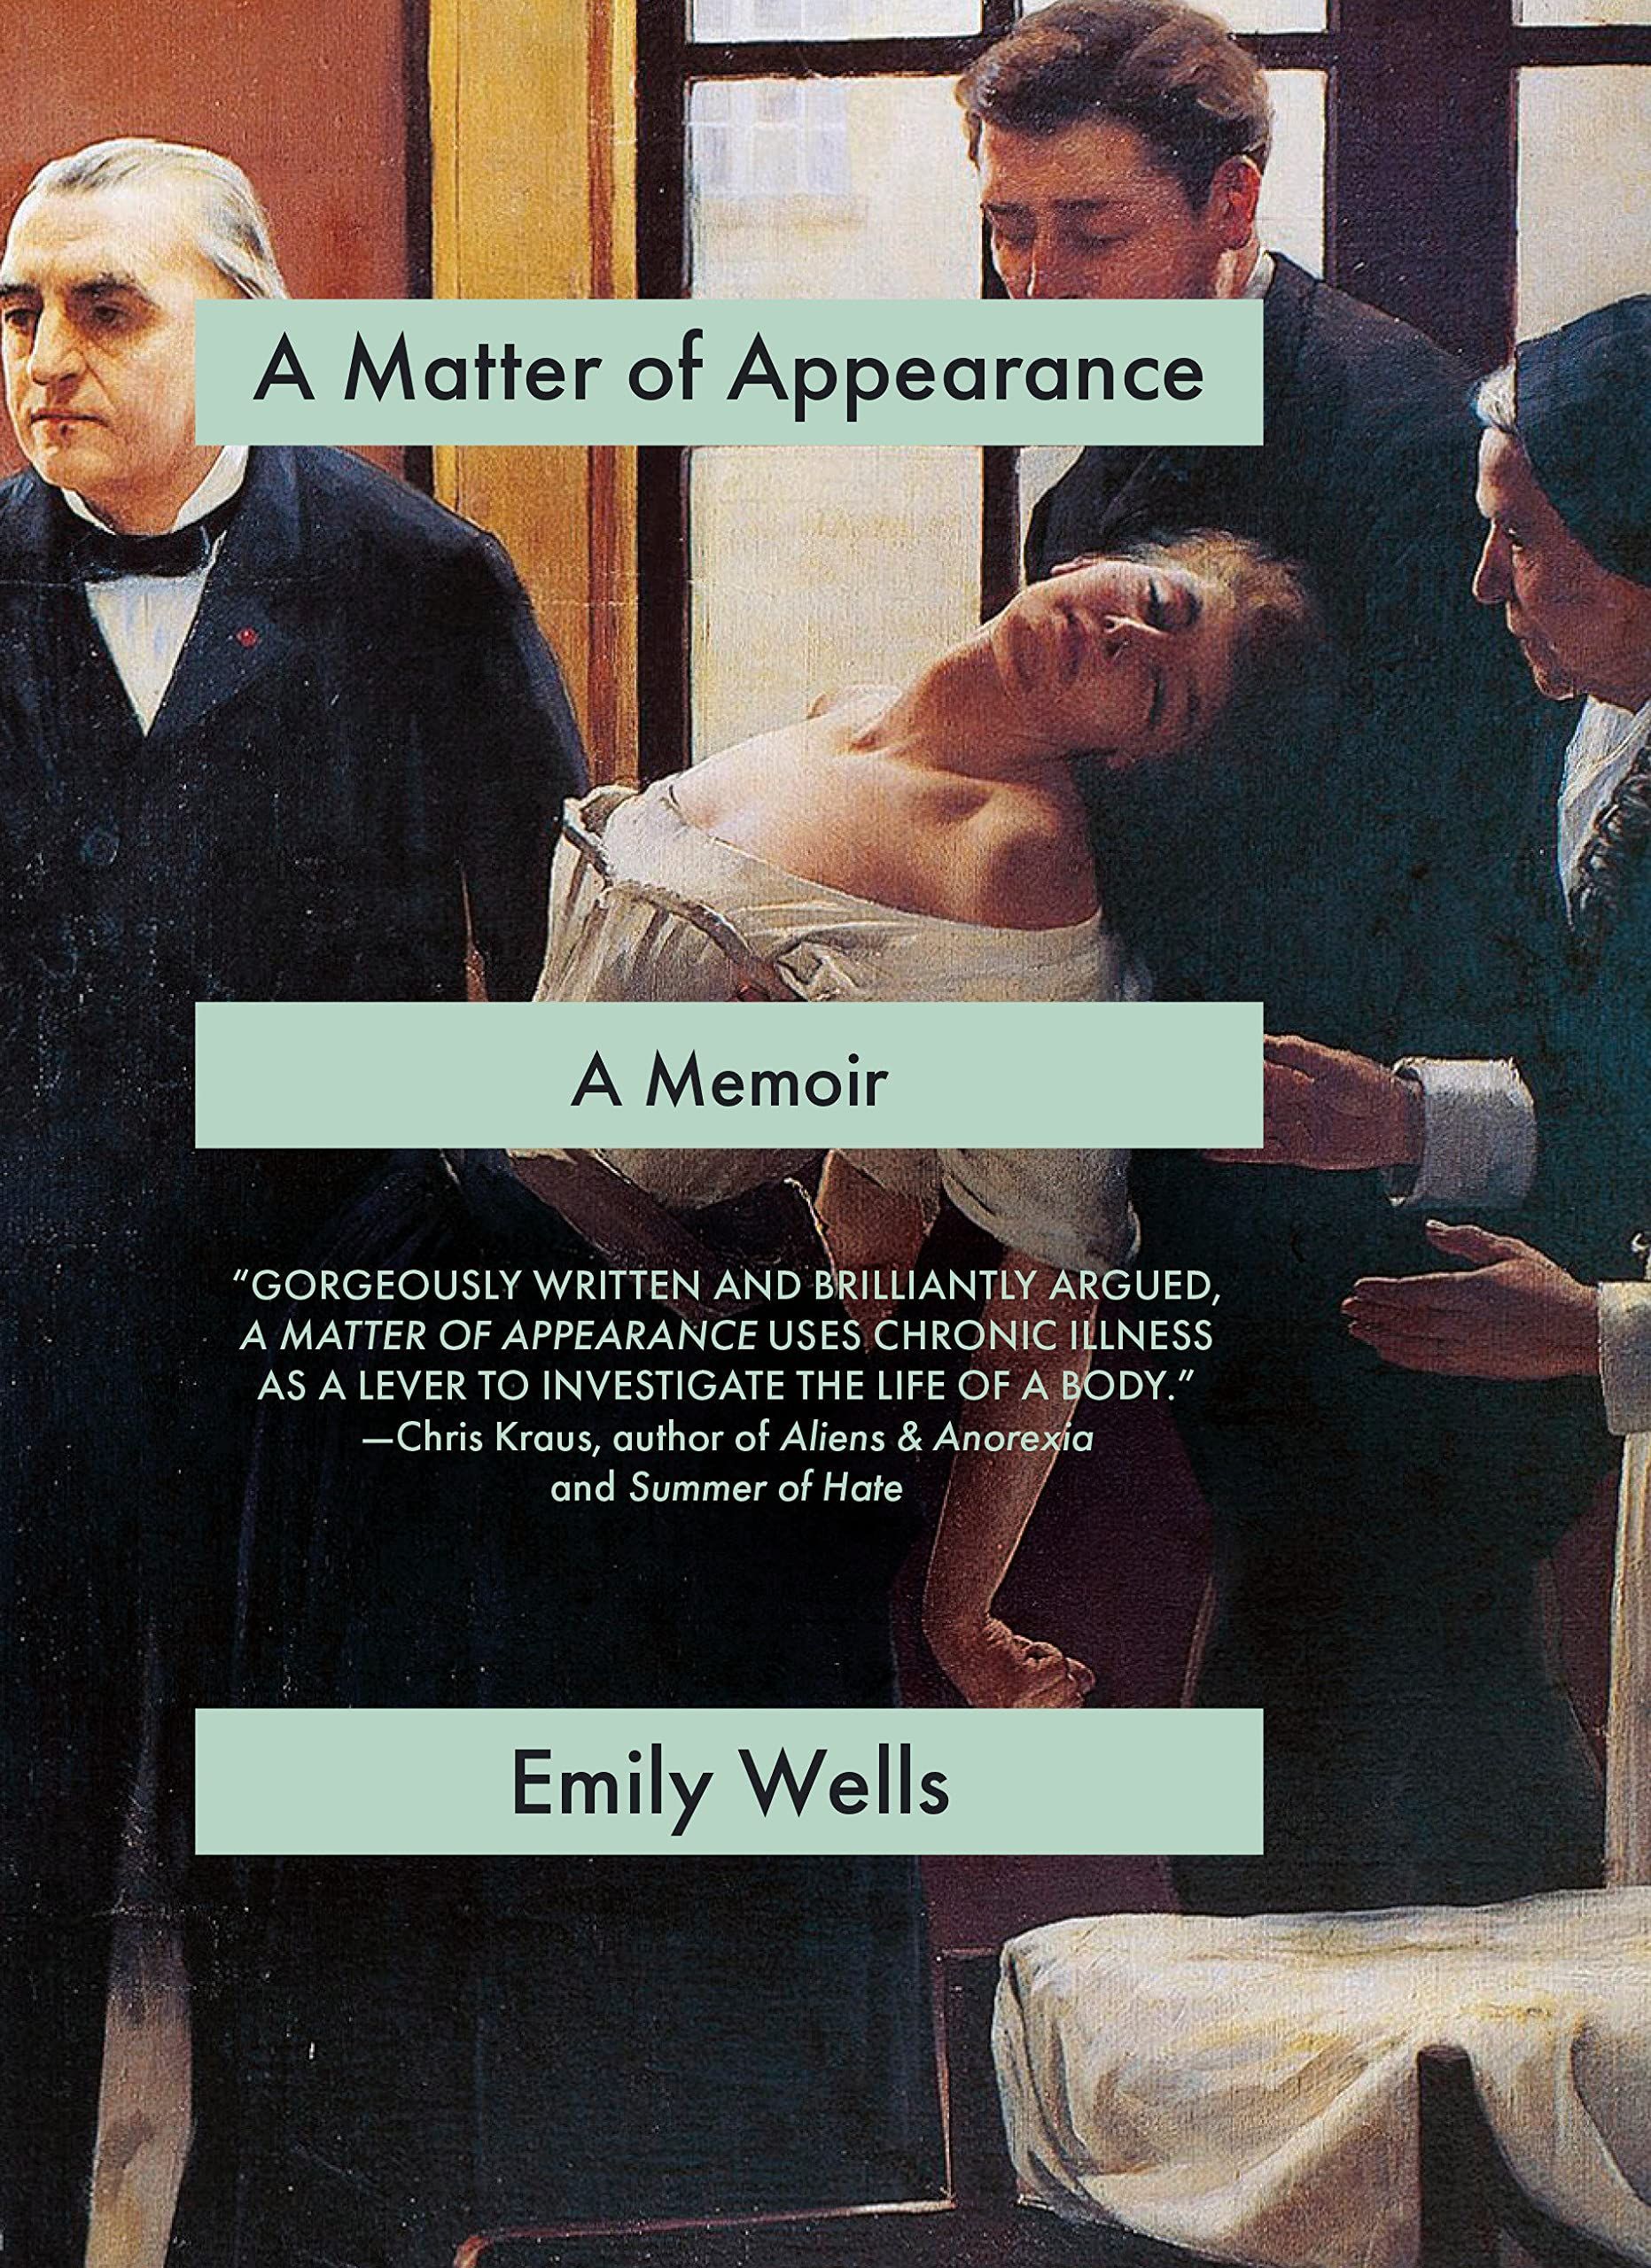 Performing the Patient: On Emily Wells’s “A Matter of Appearance”